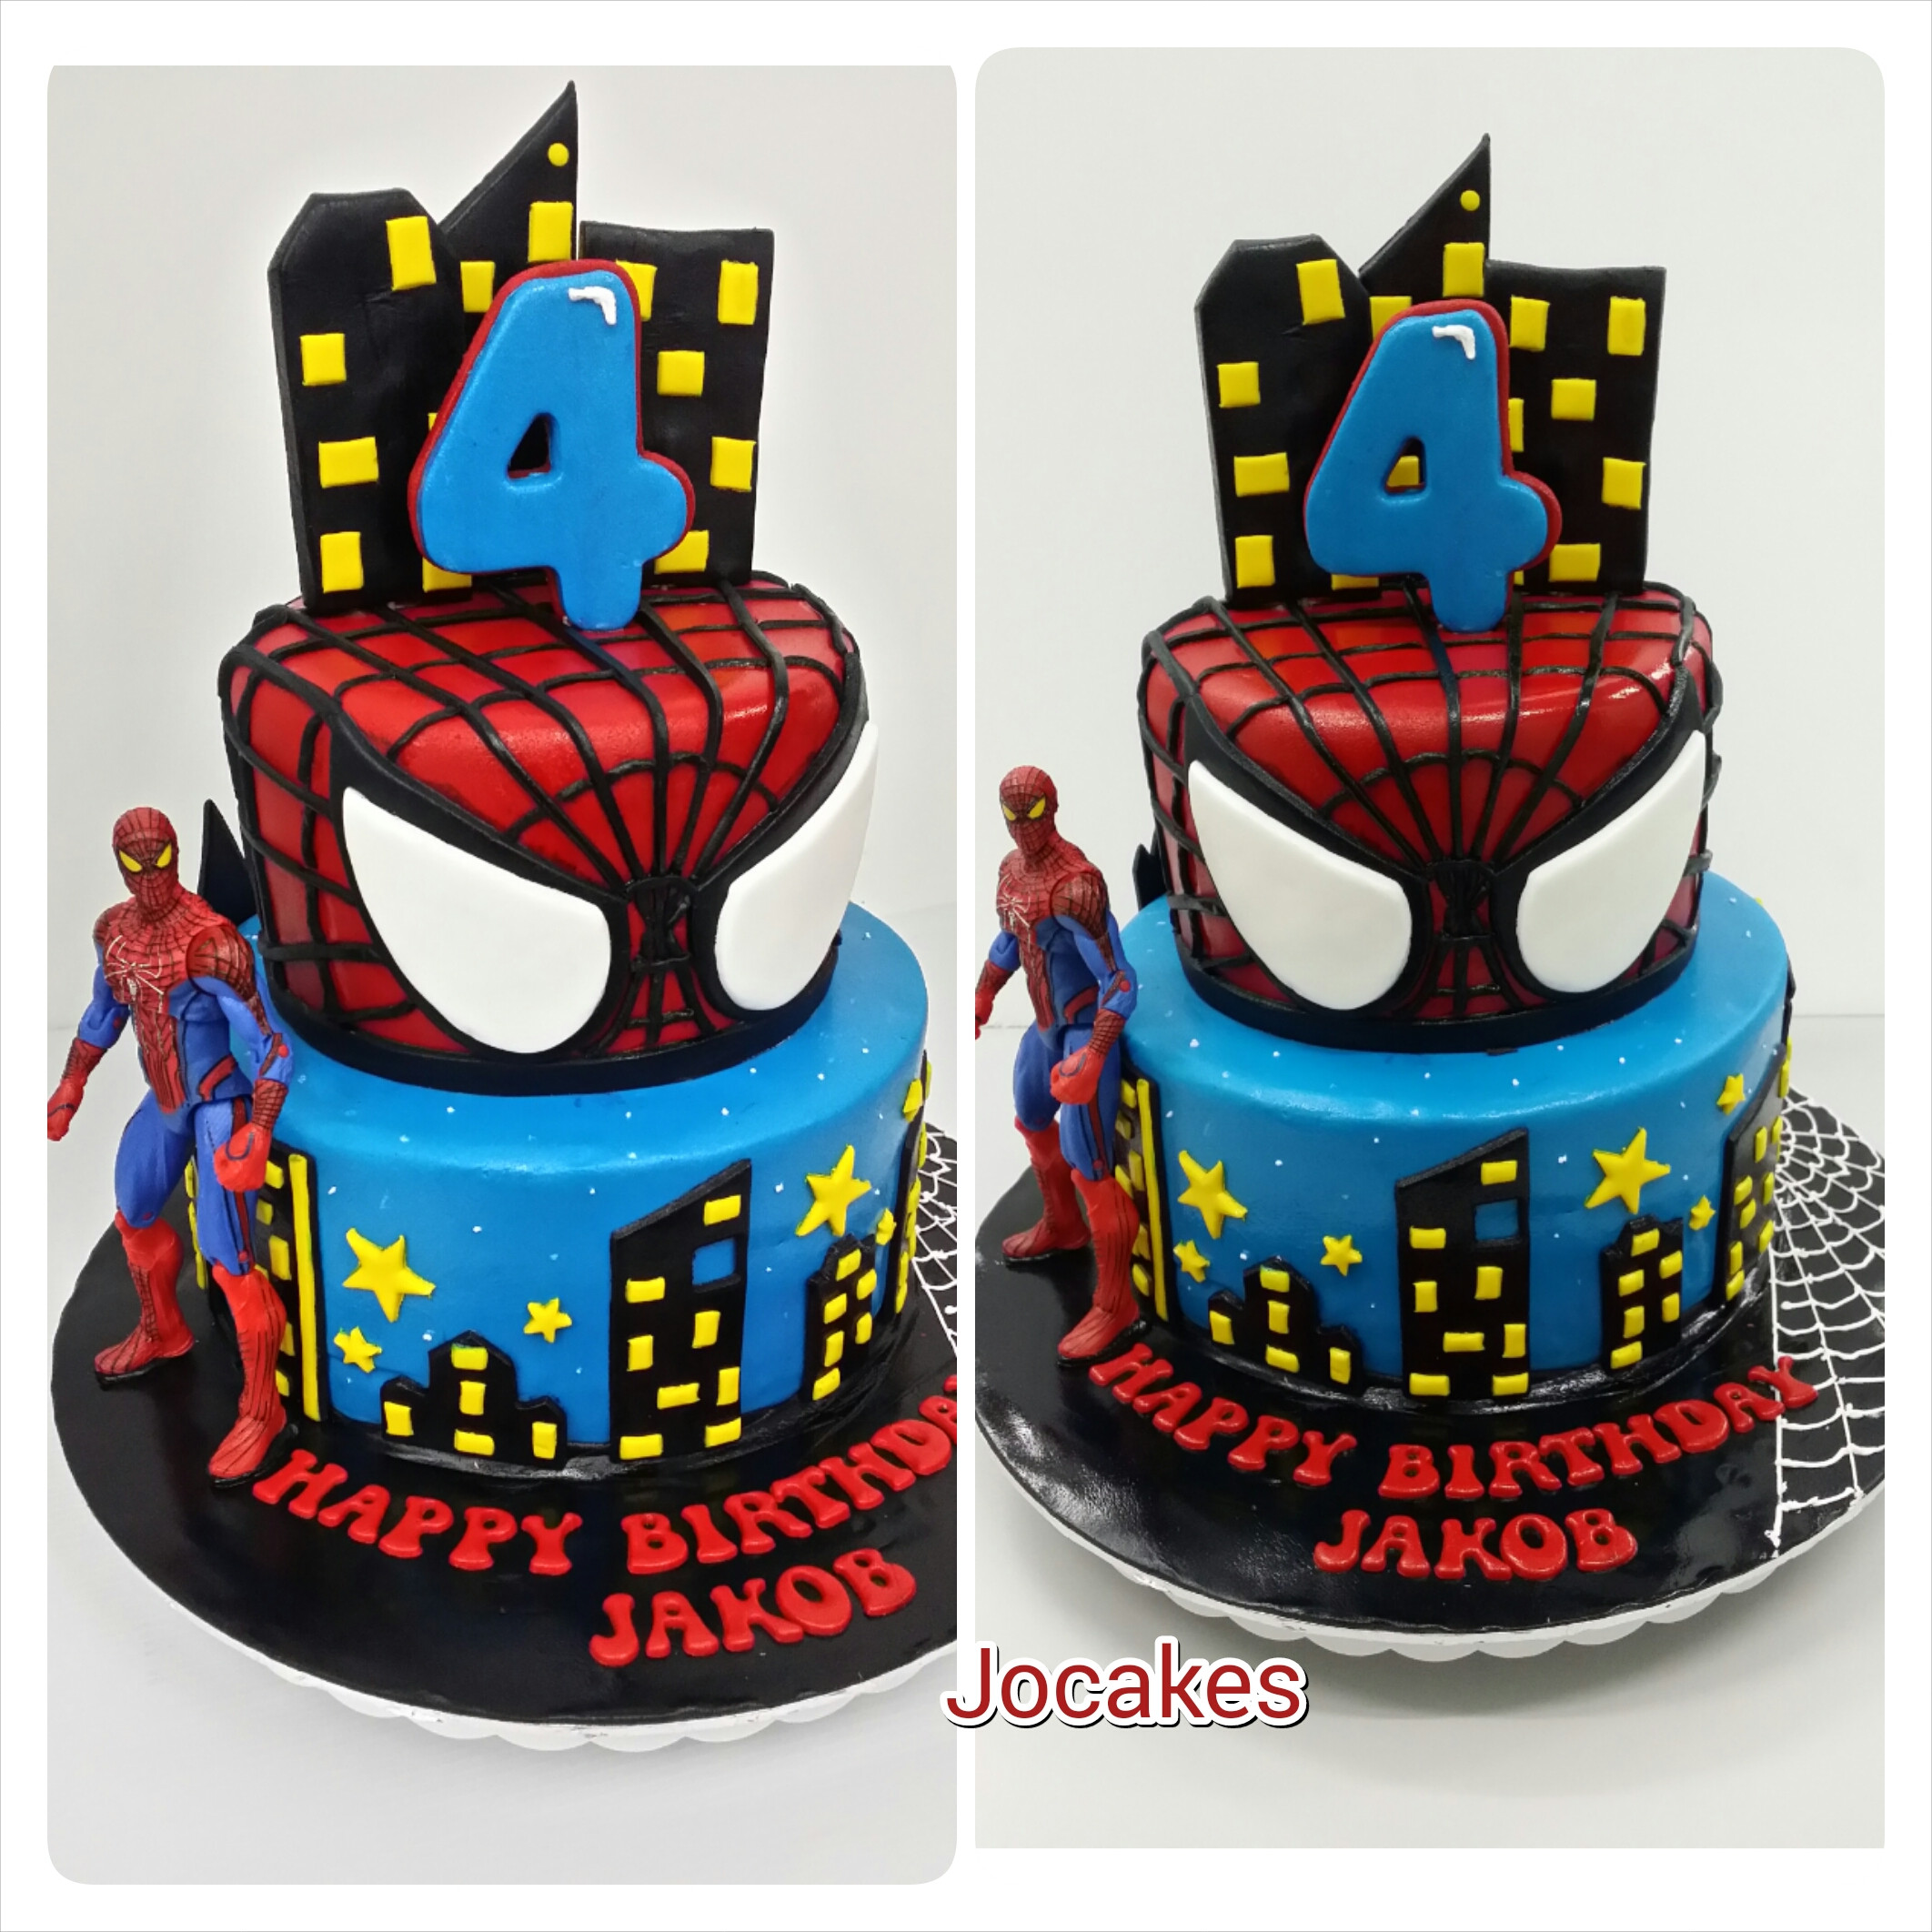 Batman Birthday Party Ideas 4 Year Old
 Spiderman cake for 4 year old Jakob